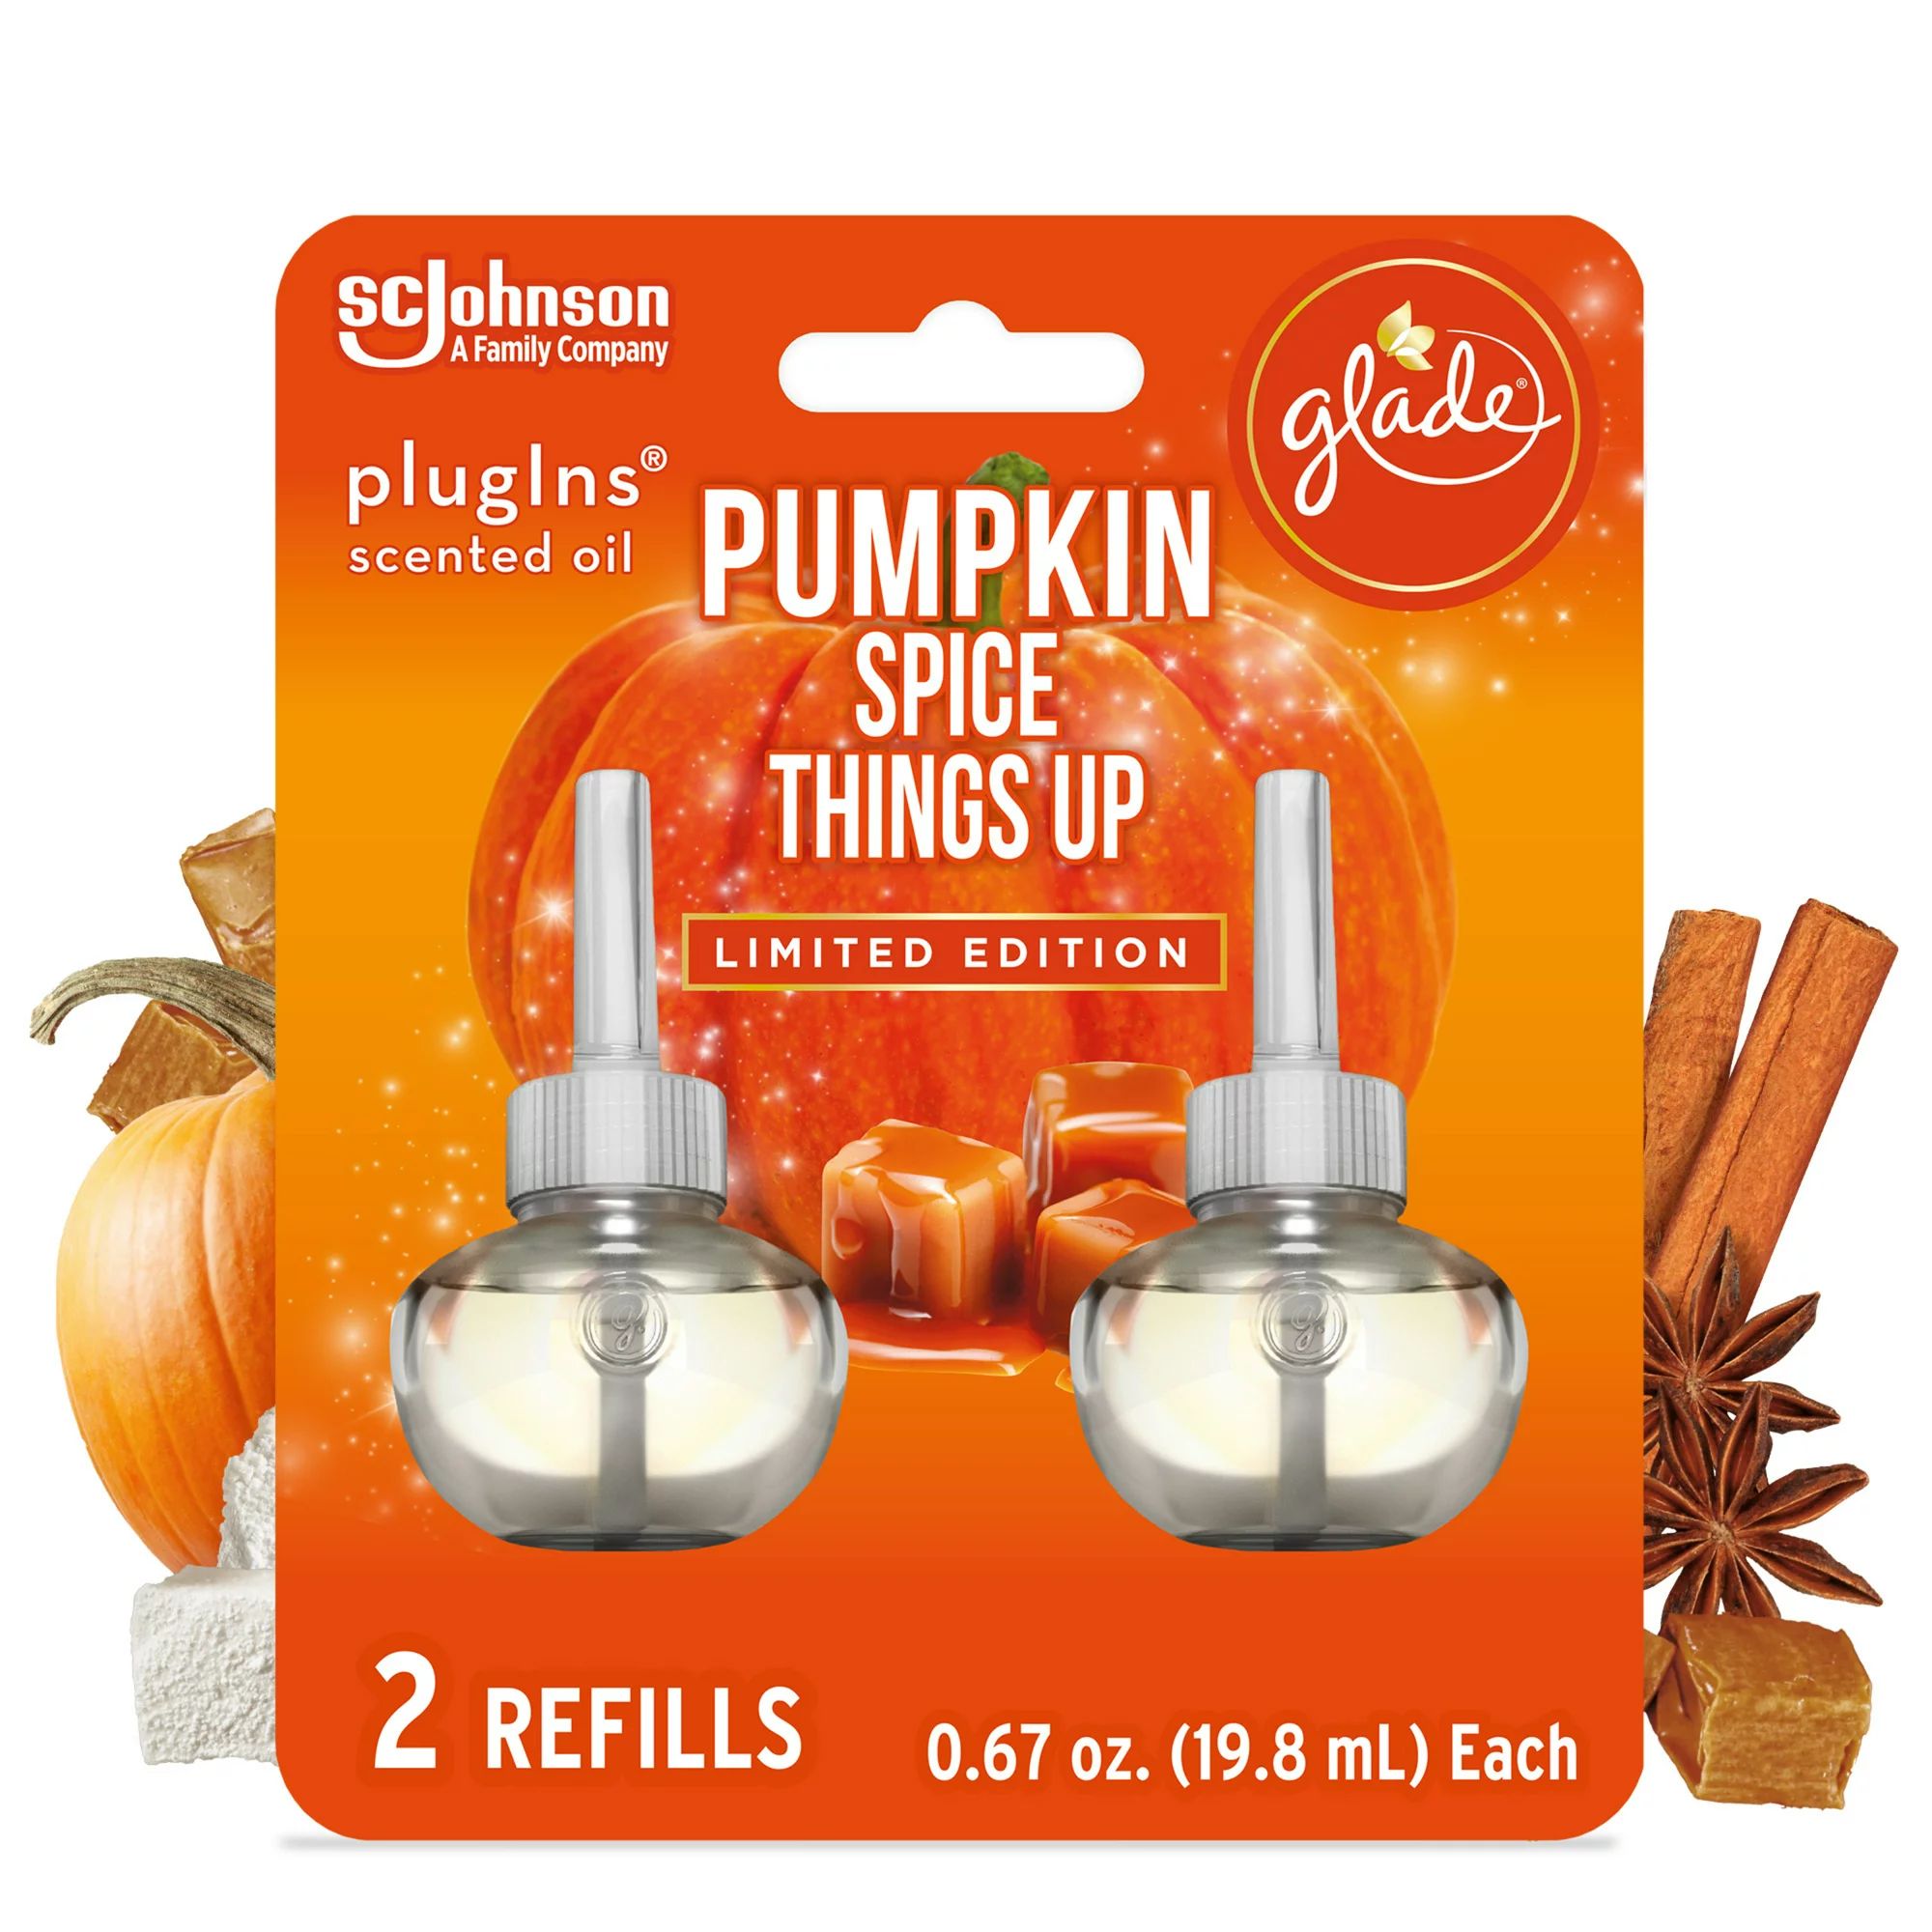 Glade PlugIns Refill 2 CT, Pumpkin Spice Things Up, 1.34 FL. OZ. Total, Scented Oil Air Freshener... | Walmart (US)